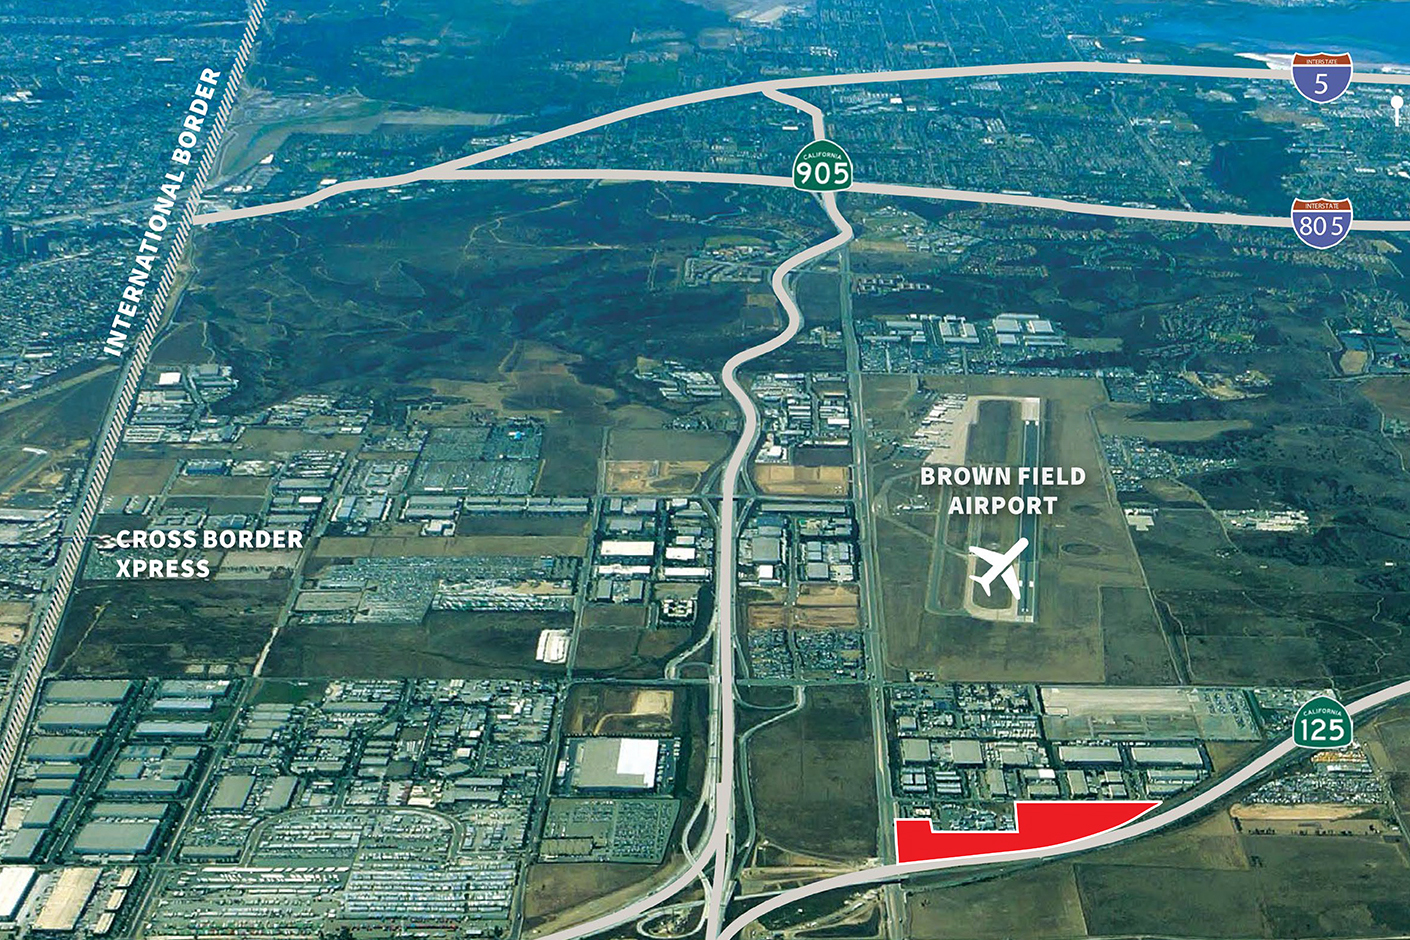 The 25-acre site in Otay Mesa is colored in red.